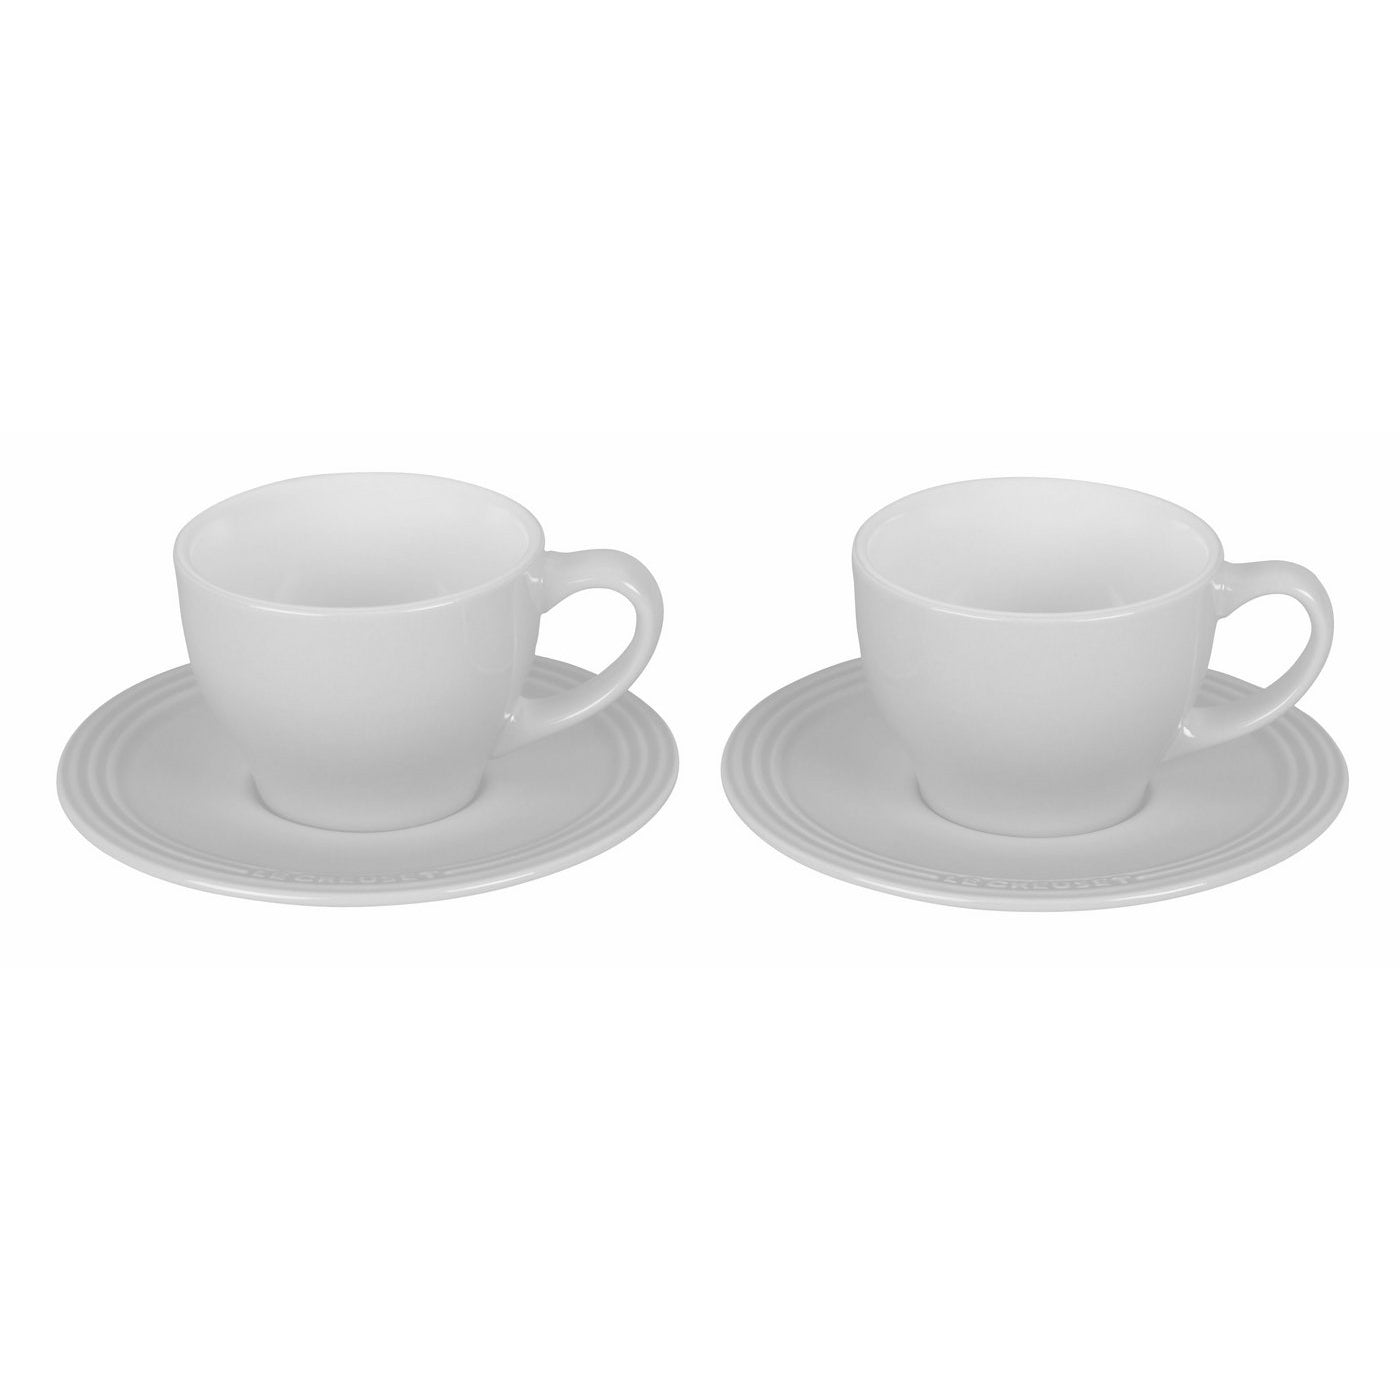 Le Creuset 7 oz. each Set of 2 Cappuccino Cups and Saucers - White